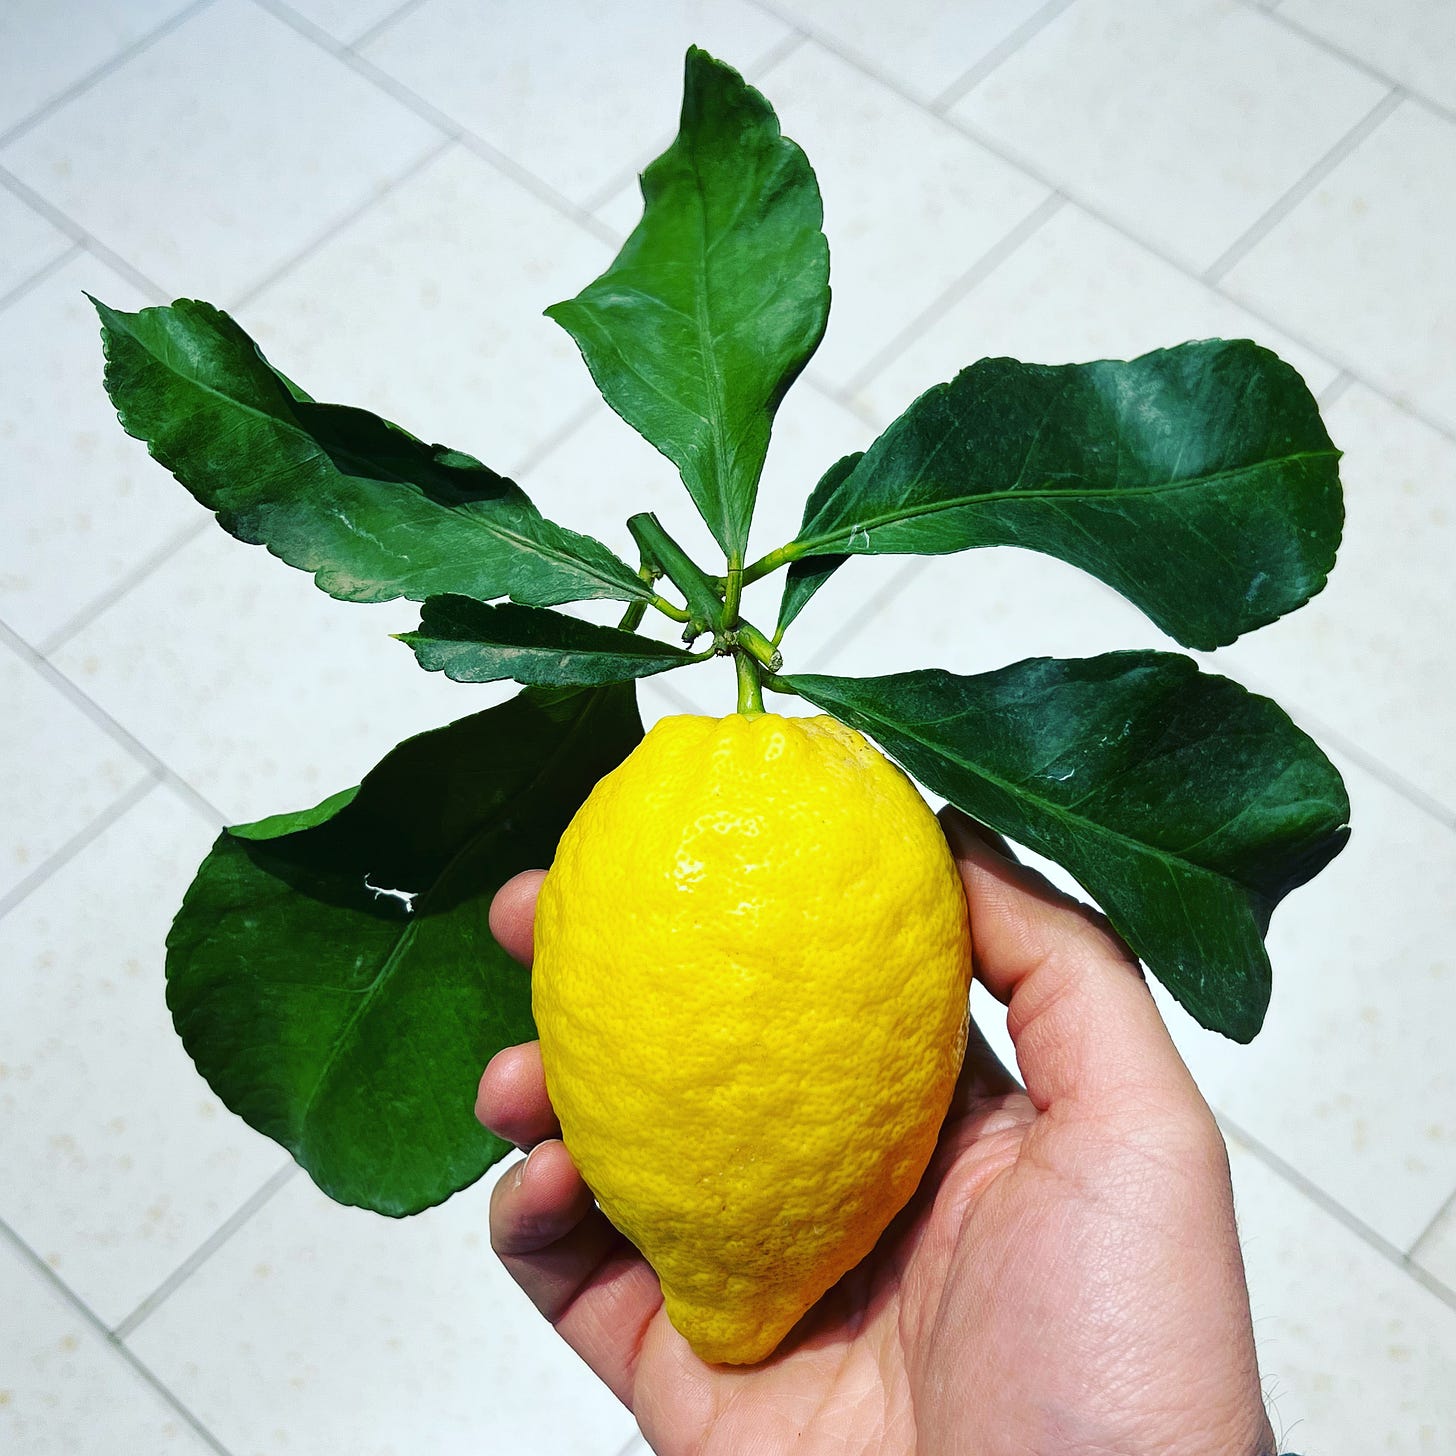 The most perfect lemon in the world is held up under a crown of its own leaves.